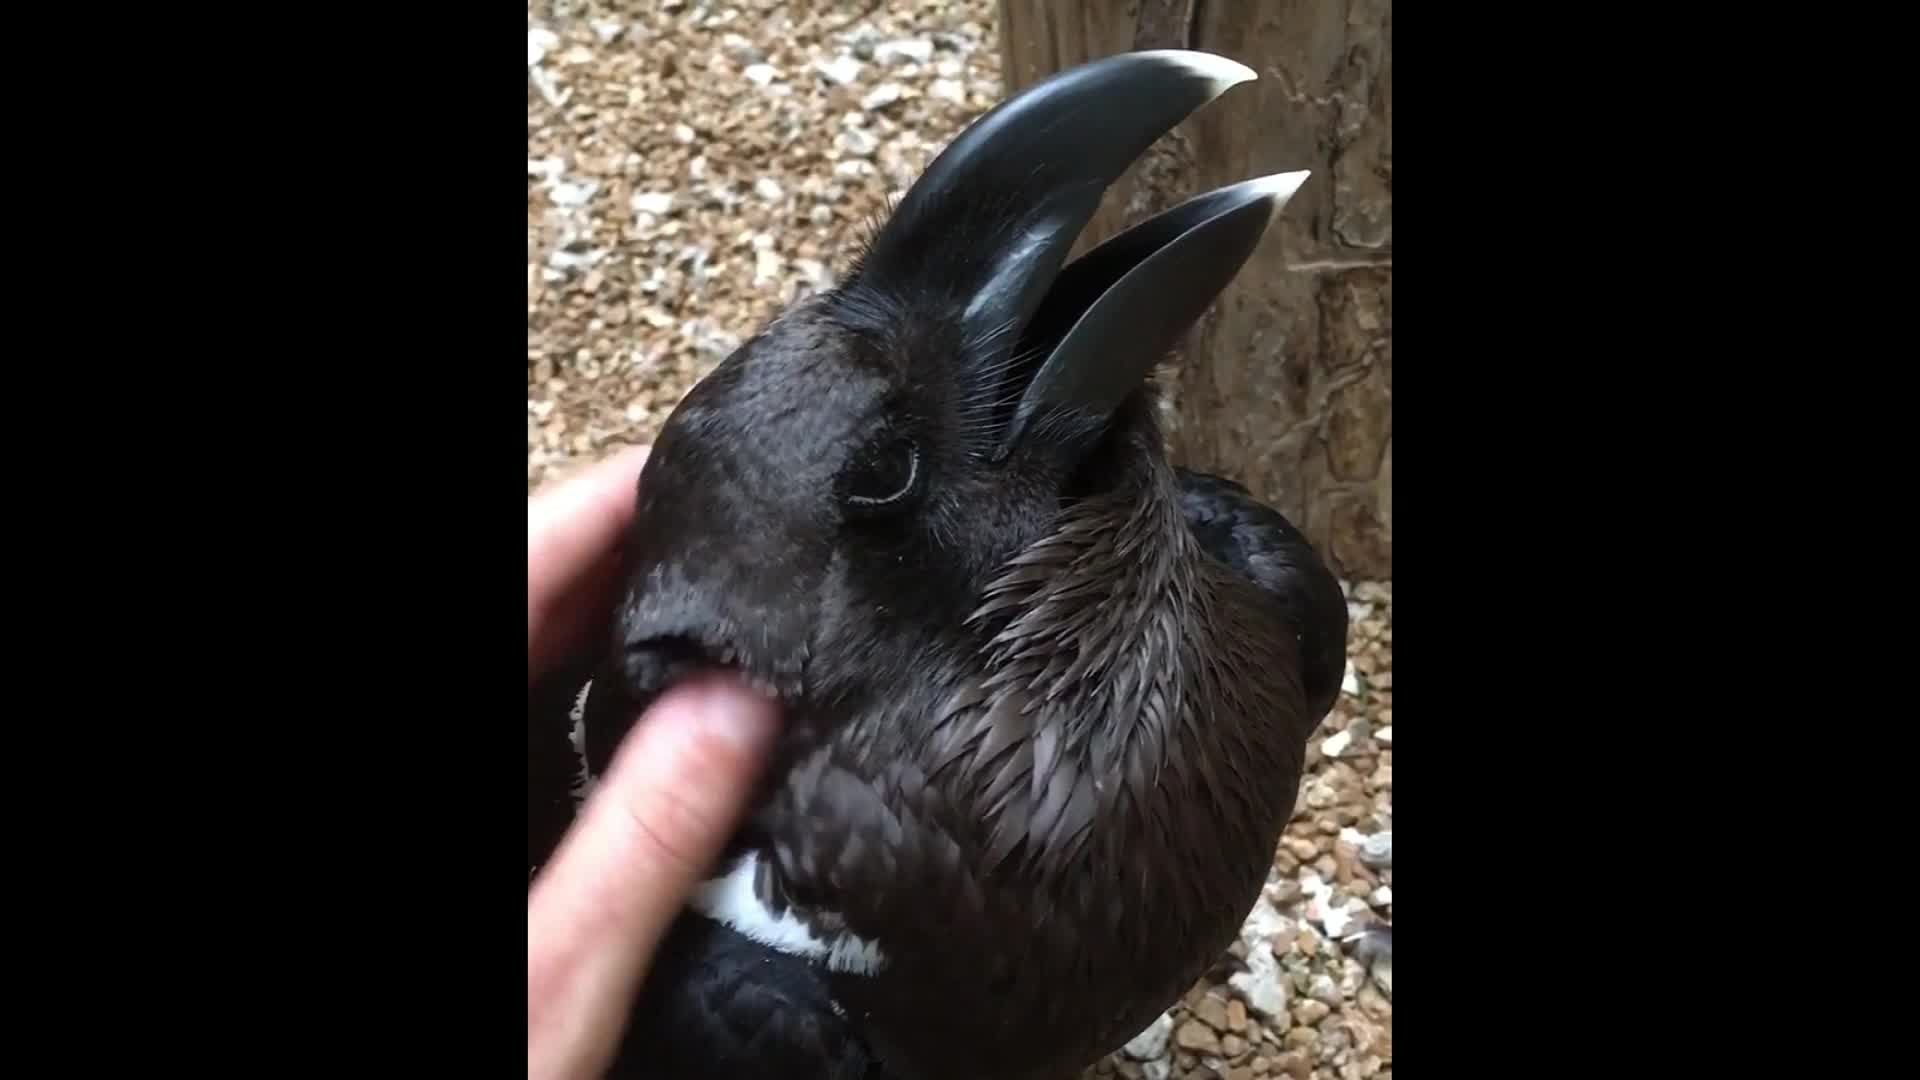 Bird or bunny? See the animal that's confusing the internet